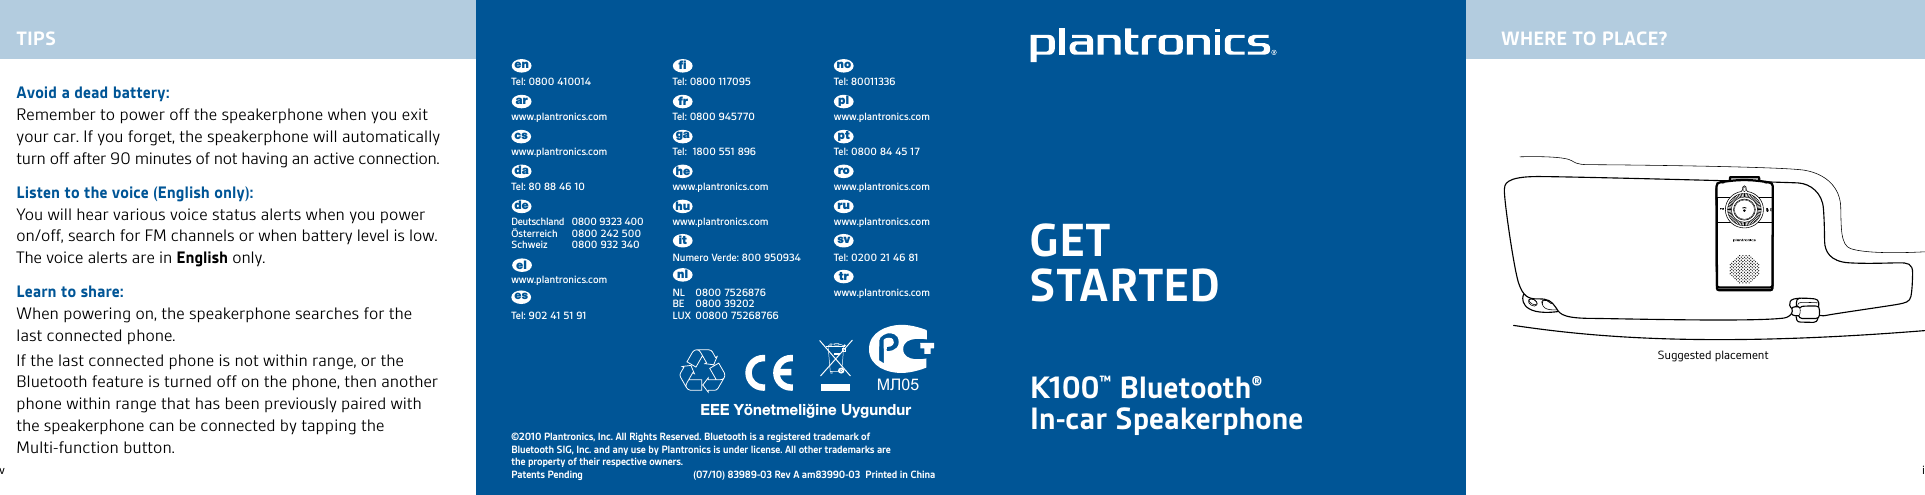 23iK100™ Bluetooth® In-car Speakerphone МЛ05©2010 Plantronics, Inc. All Rights Reserved. Bluetooth is a registered trademark of Bluetooth SIG, Inc. and any use by Plantronics is under license. All other trademarks are the property of their respective owners.Patents Pending (07/10) 83989-03 Rev A am83990-03  Printed in ChinaAvoid a dead battery:Remember to power off the speakerphone when you exit your car. If you forget, the speakerphone will automatically turn off after 90 minutes of not having an active connection.Listen to the voice (English only):You will hear various voice status alerts when you power on/off, search for FM channels or when battery level is low. The voice alerts are in English only.Learn to share:When powering on, the speakerphone searches for the last connected phone.If the last connected phone is not within range, or the Bluetooth feature is turned off on the phone, then another phone within range that has been previously paired with the speakerphone can be connected by tapping the Multi-function button.GETSTARTEDTIPS WHERE TO PLACE?Suggested placementSuggested placementvTel: 0800 410014www.plantronics.comwww.plantronics.comTel: 80 88 46 10Deutschland  0800 9323 400 Österreich  0800 242 500 Schweiz  0800 932 340www.plantronics.comTel: 902 41 51 91enTel: 80011336 www.plantronics.comTel: 0800 84 45 17www.plantronics.comwww.plantronics.comTel: 0200 21 46 81www.plantronics.comTel: 0800 117095Tel: 0800 945770Tel:  1800 551 896www.plantronics.comwww.plantronics.comNumero Verde: 800 950934NL  0800 7526876 BE  0800 39202 LUX  00800 75268766arcsdadeelesﬁfrgahehuitnlnoplptrorusvtr